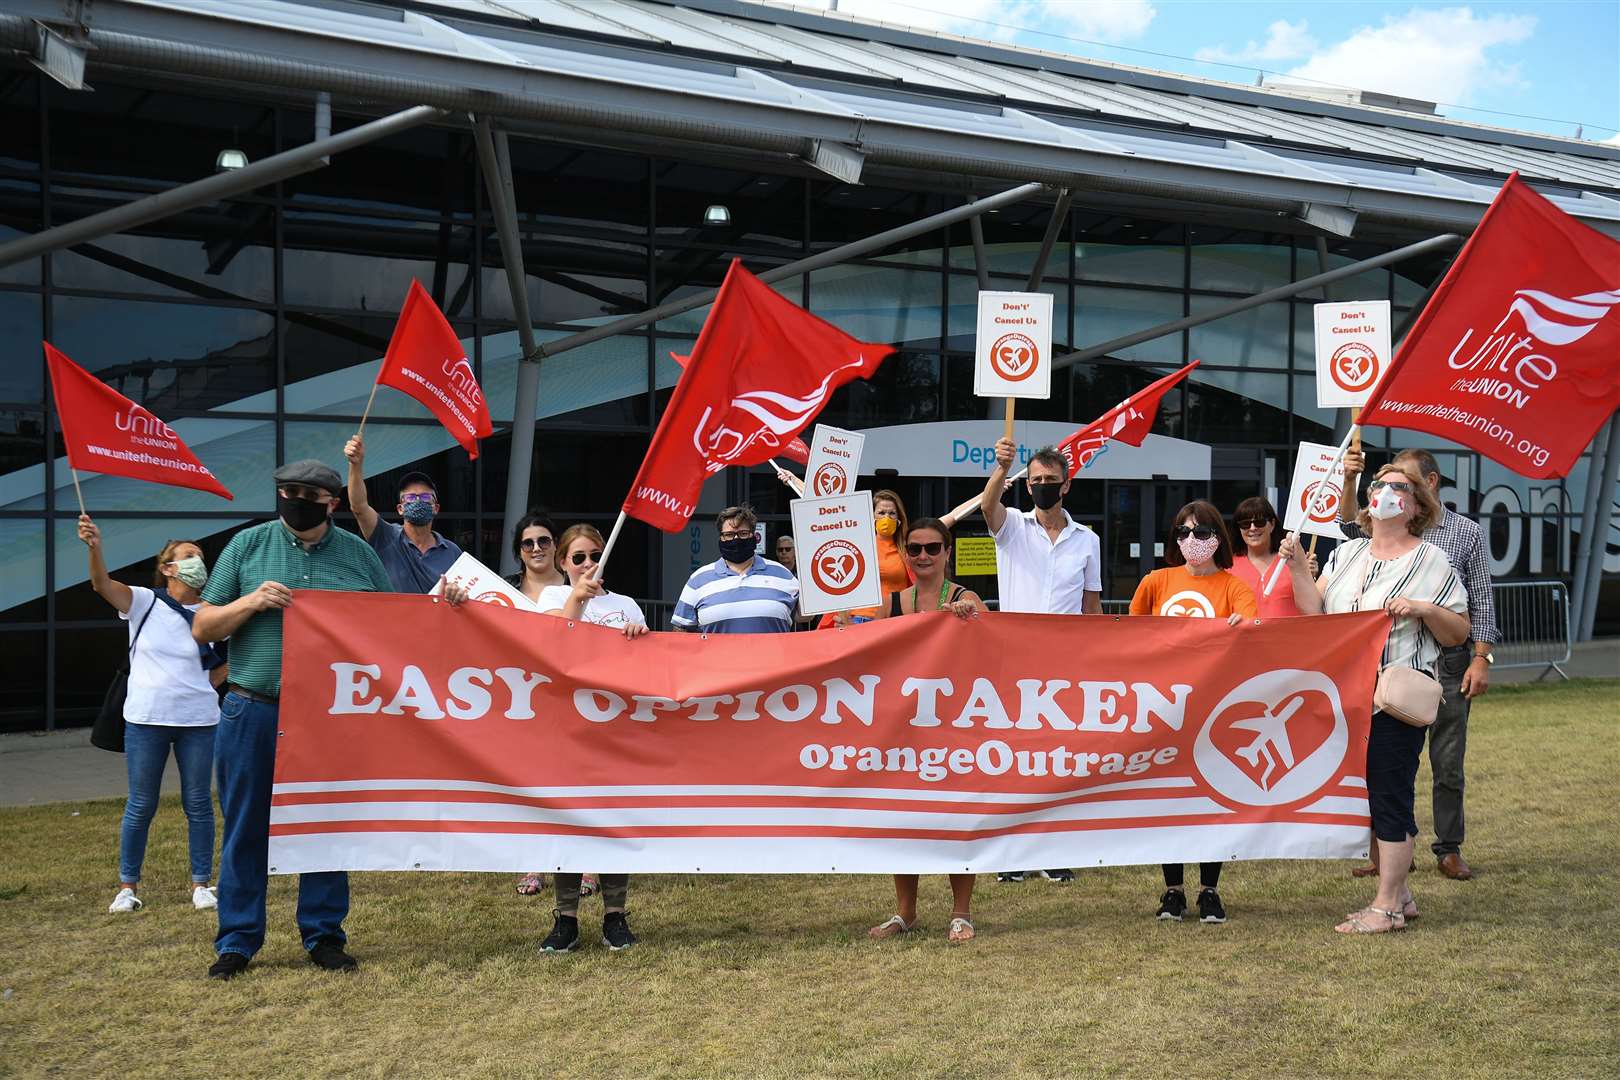 Members of Unite and easyJet staff protest outside Southend Airport (Kirsty O’Connor/PA)